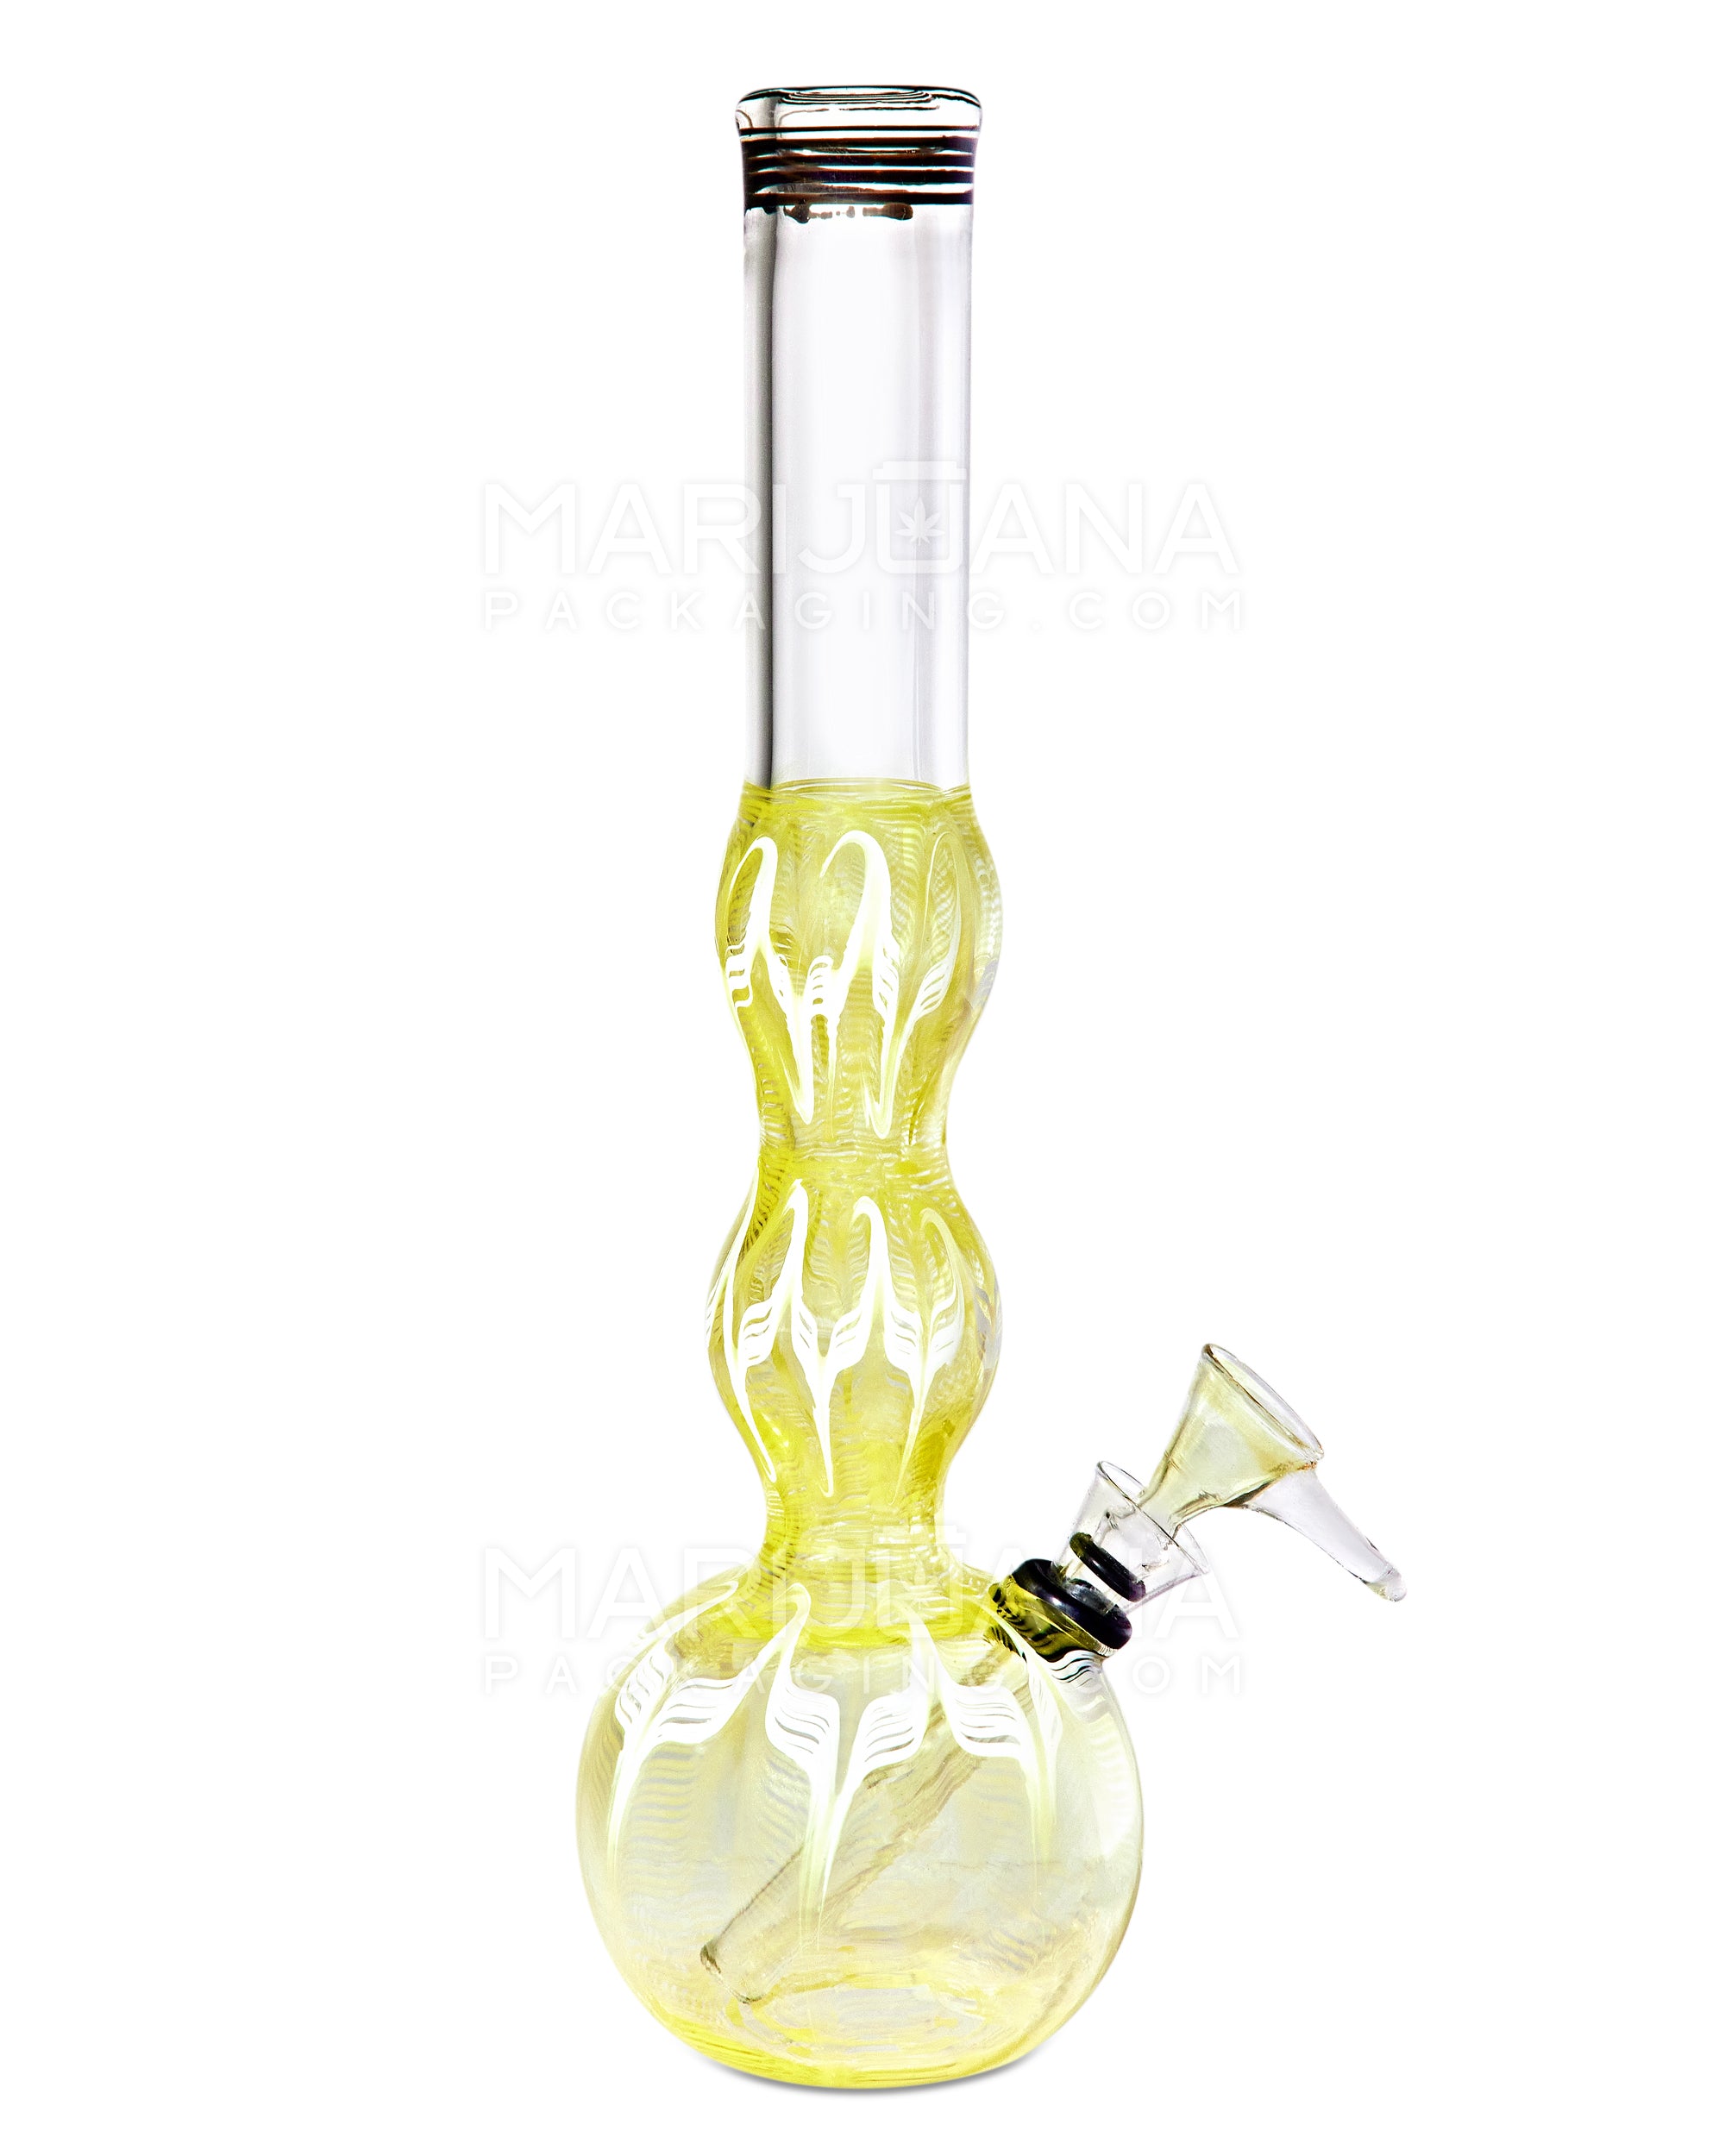 USA Glass | Bulged Neck Raked Glass Egg Water Pipe | 11in Tall - Grommet Bowl - Assorted - 5